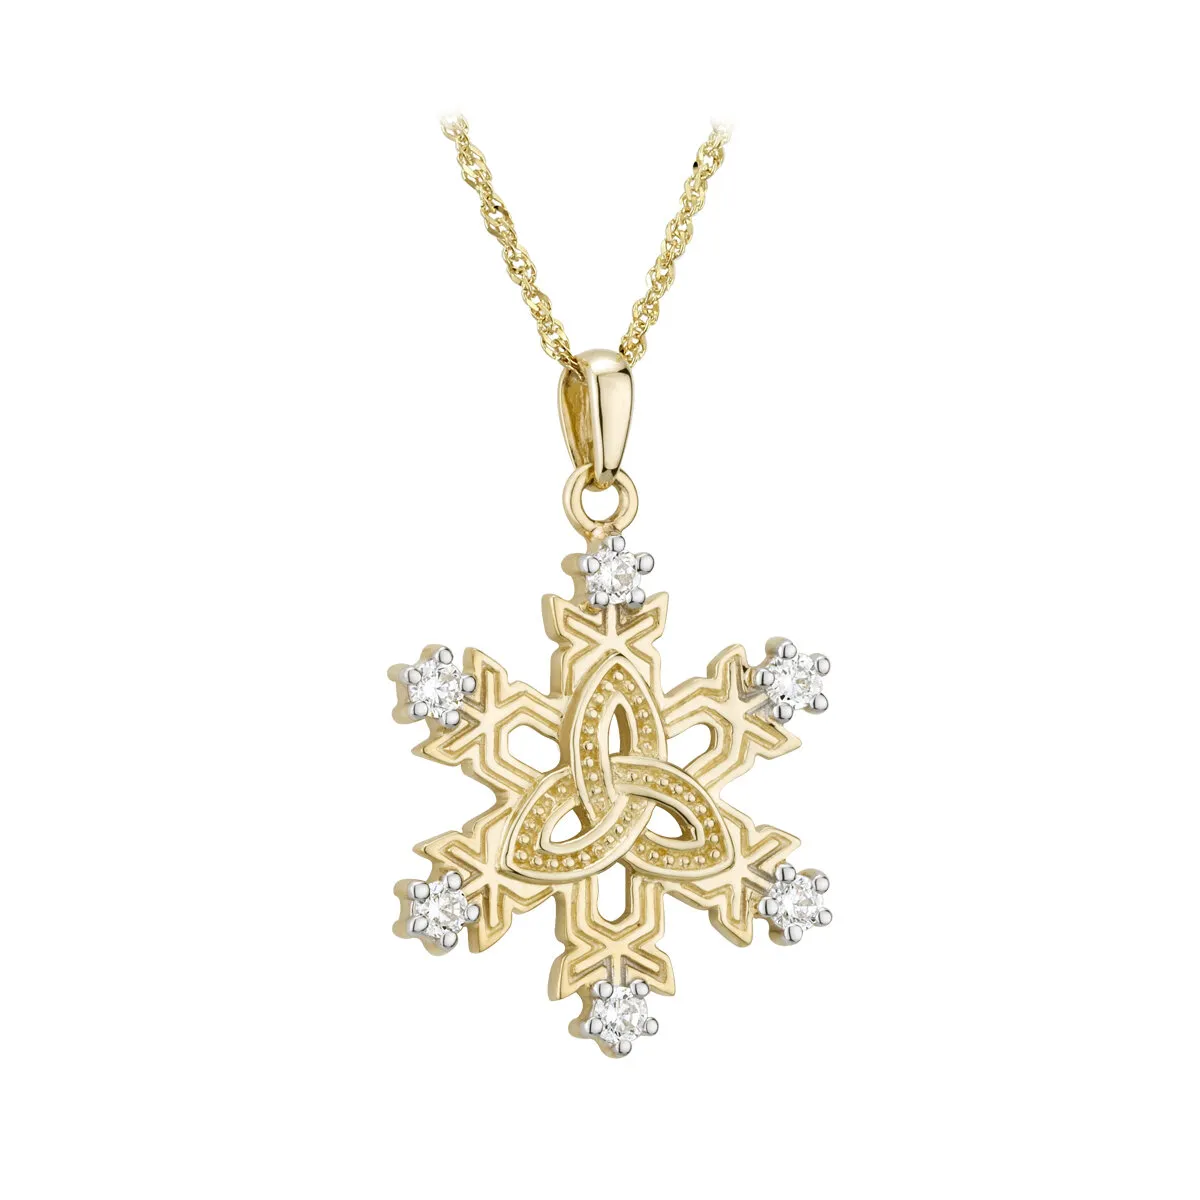 10k Gold Celtic Snowflake Necklace with Cubic Zirconia Stones...